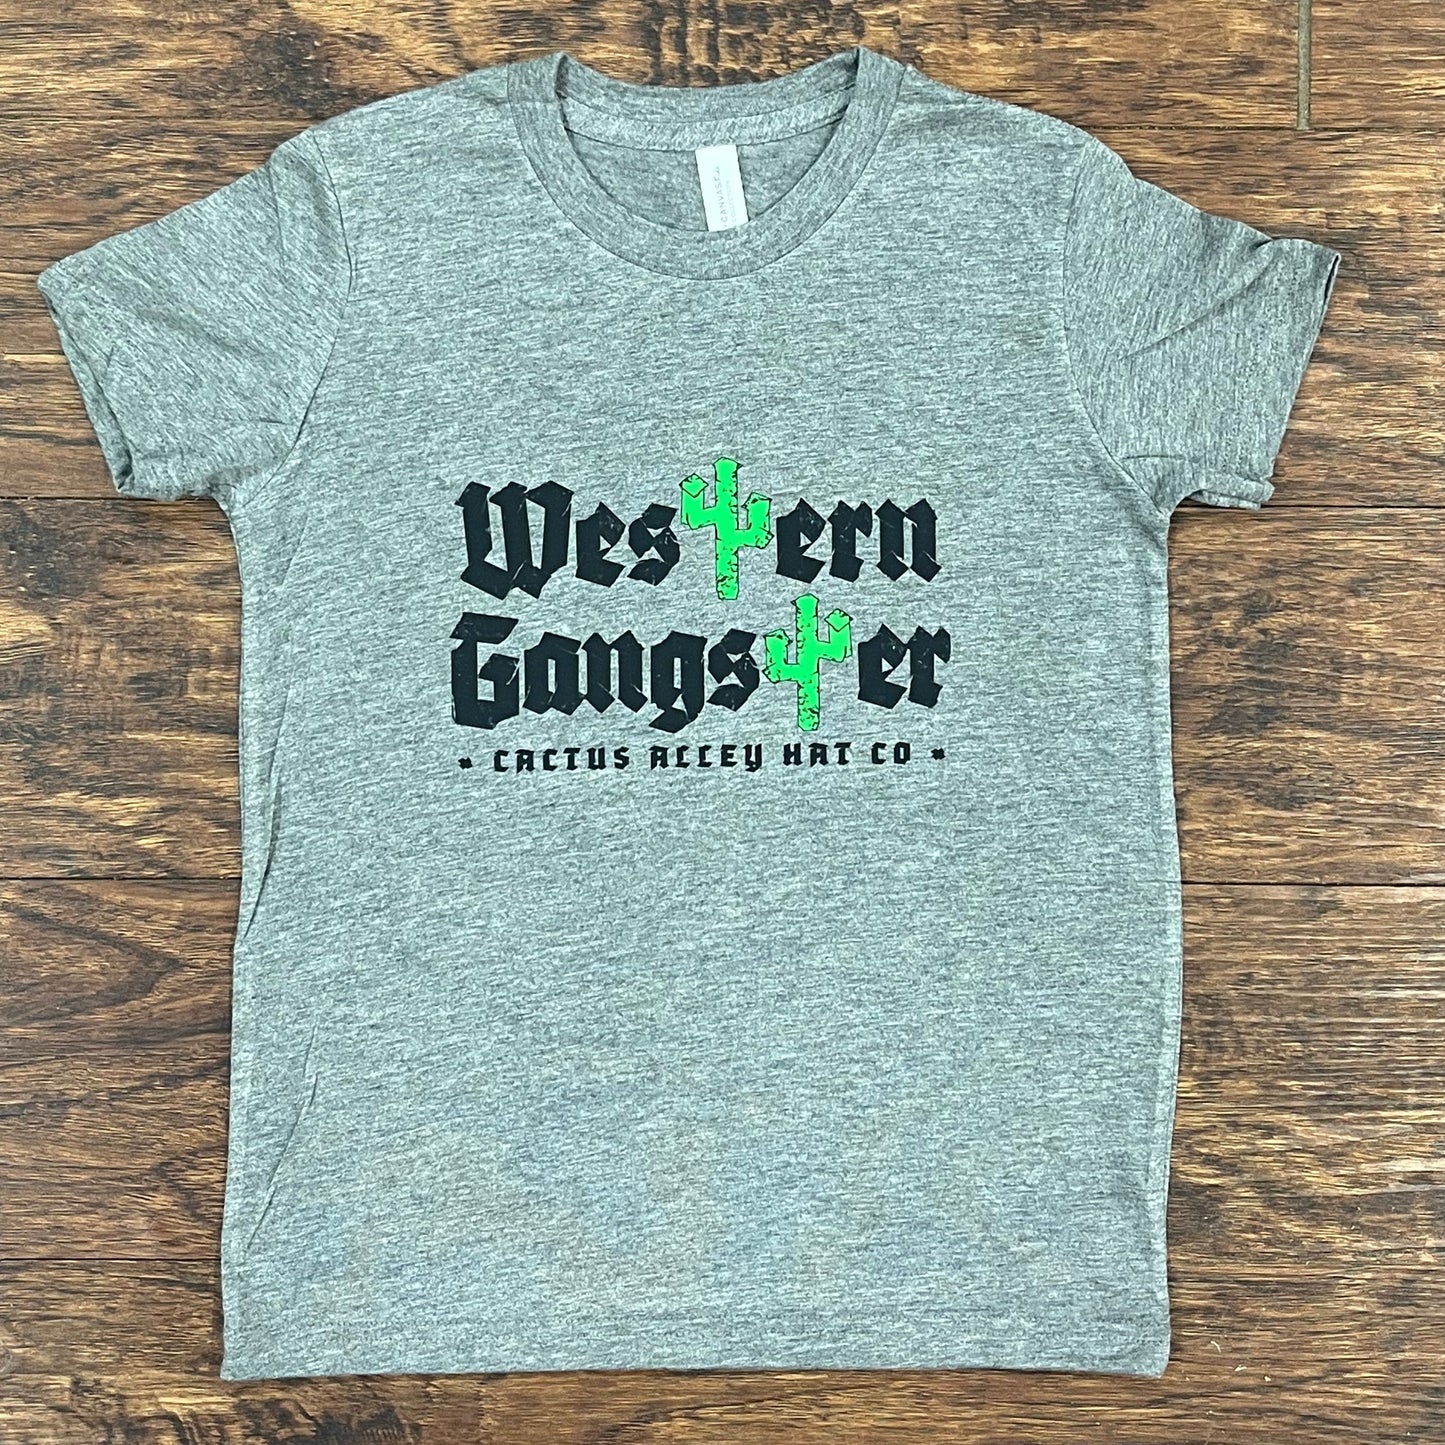 Lil "Western Gangster" - Grey Frost Youth Tee